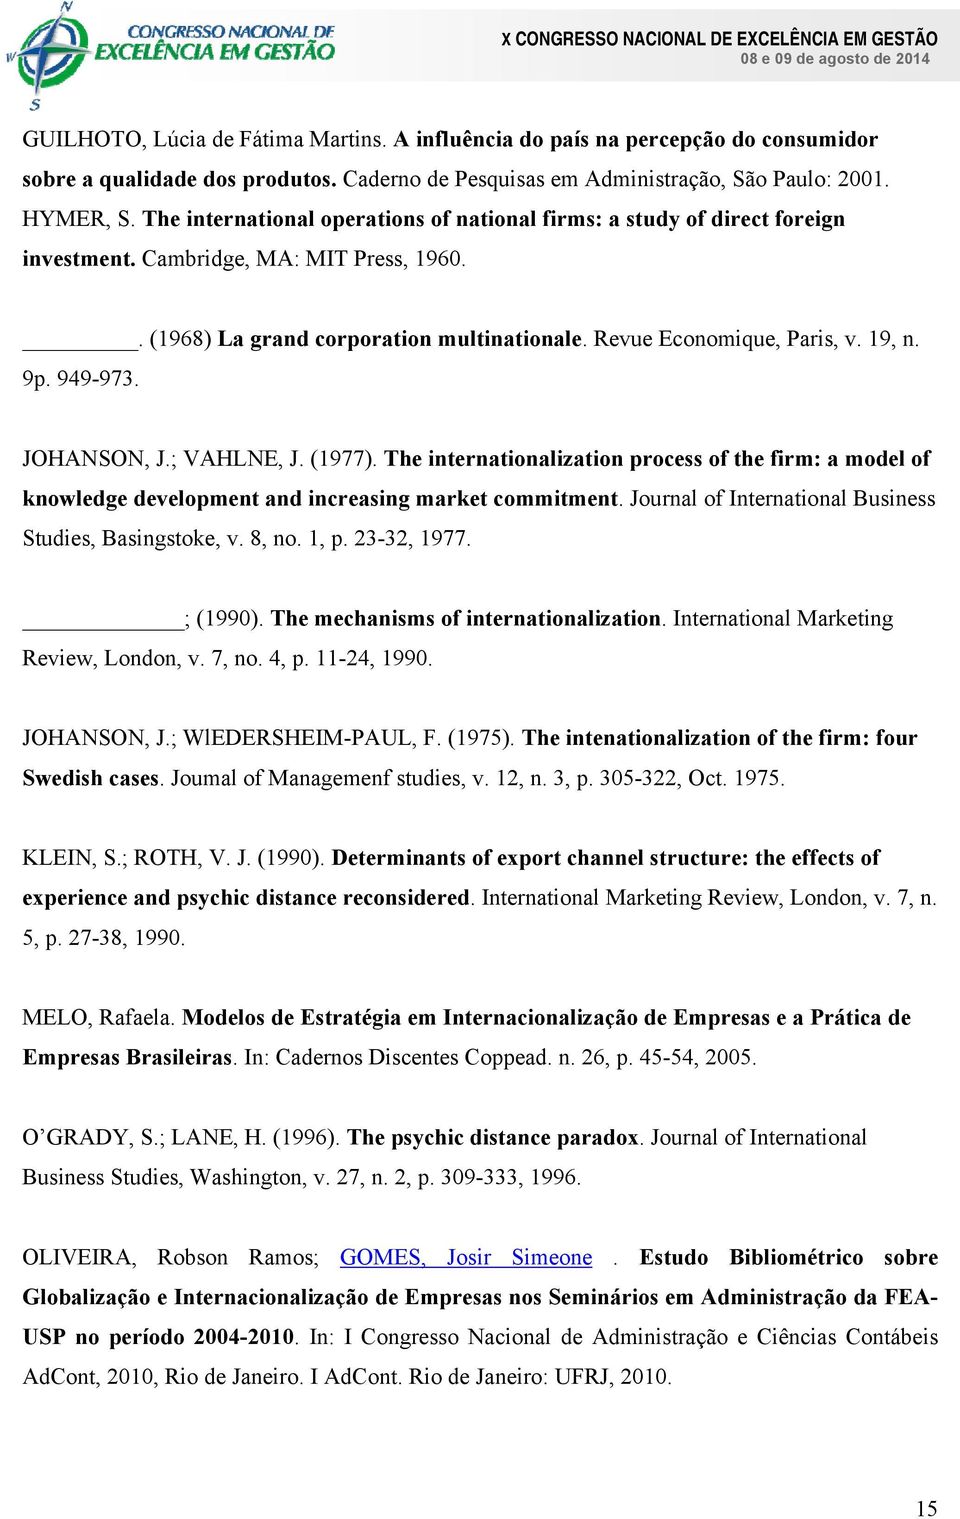 9p. 949-973. JOHANSON, J.; VAHLNE, J. (1977). The internationalization process of the firm: a model of knowledge development and increasing market commitment.